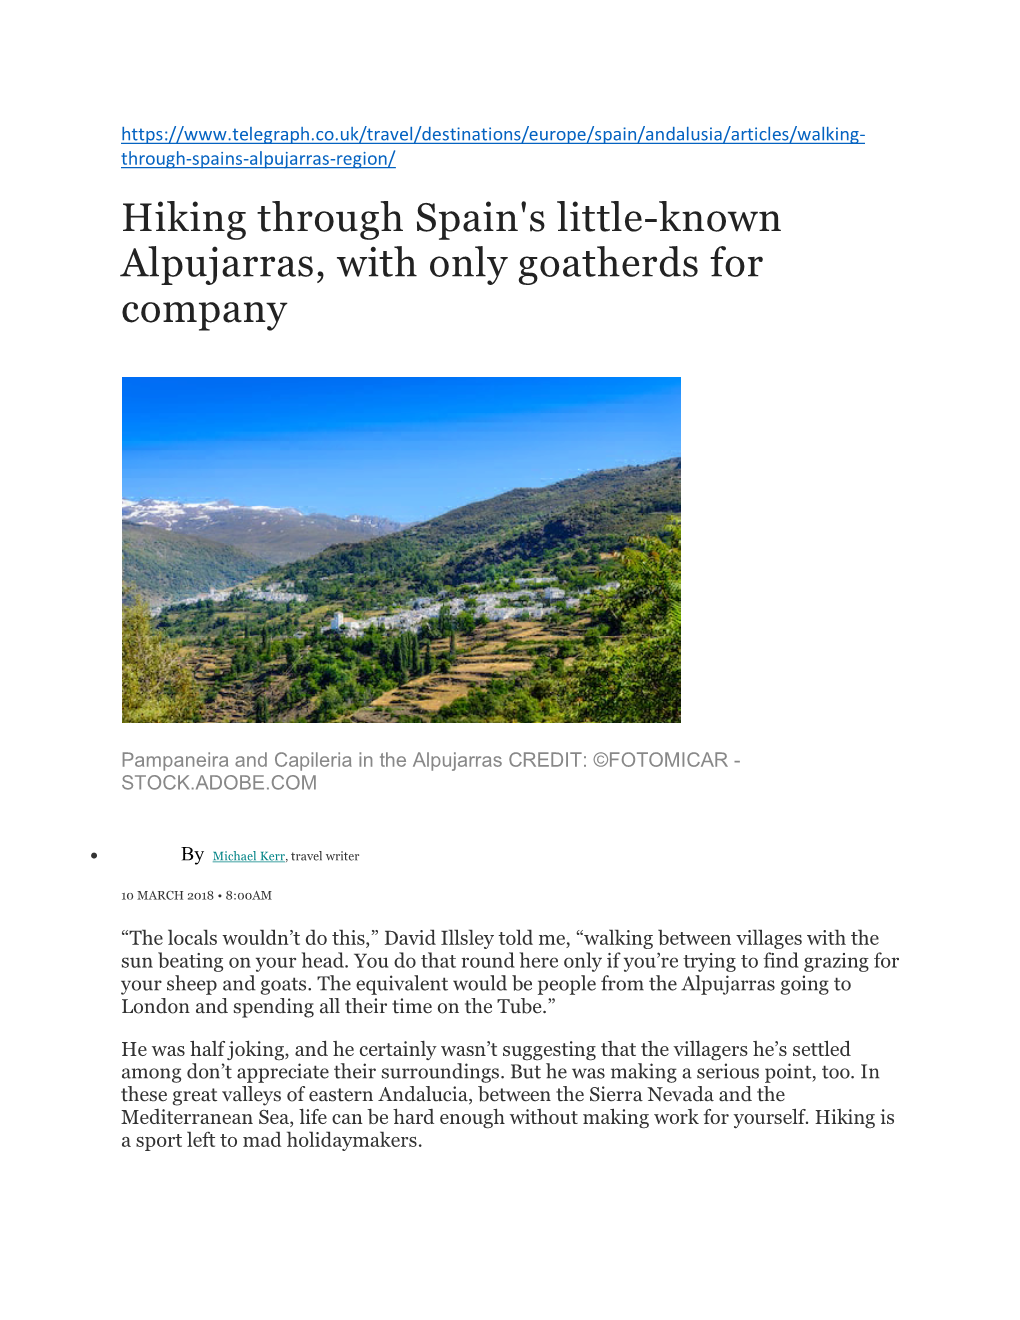 Hiking Through Spain's Little-Known Alpujarras, with Only Goatherds for Company